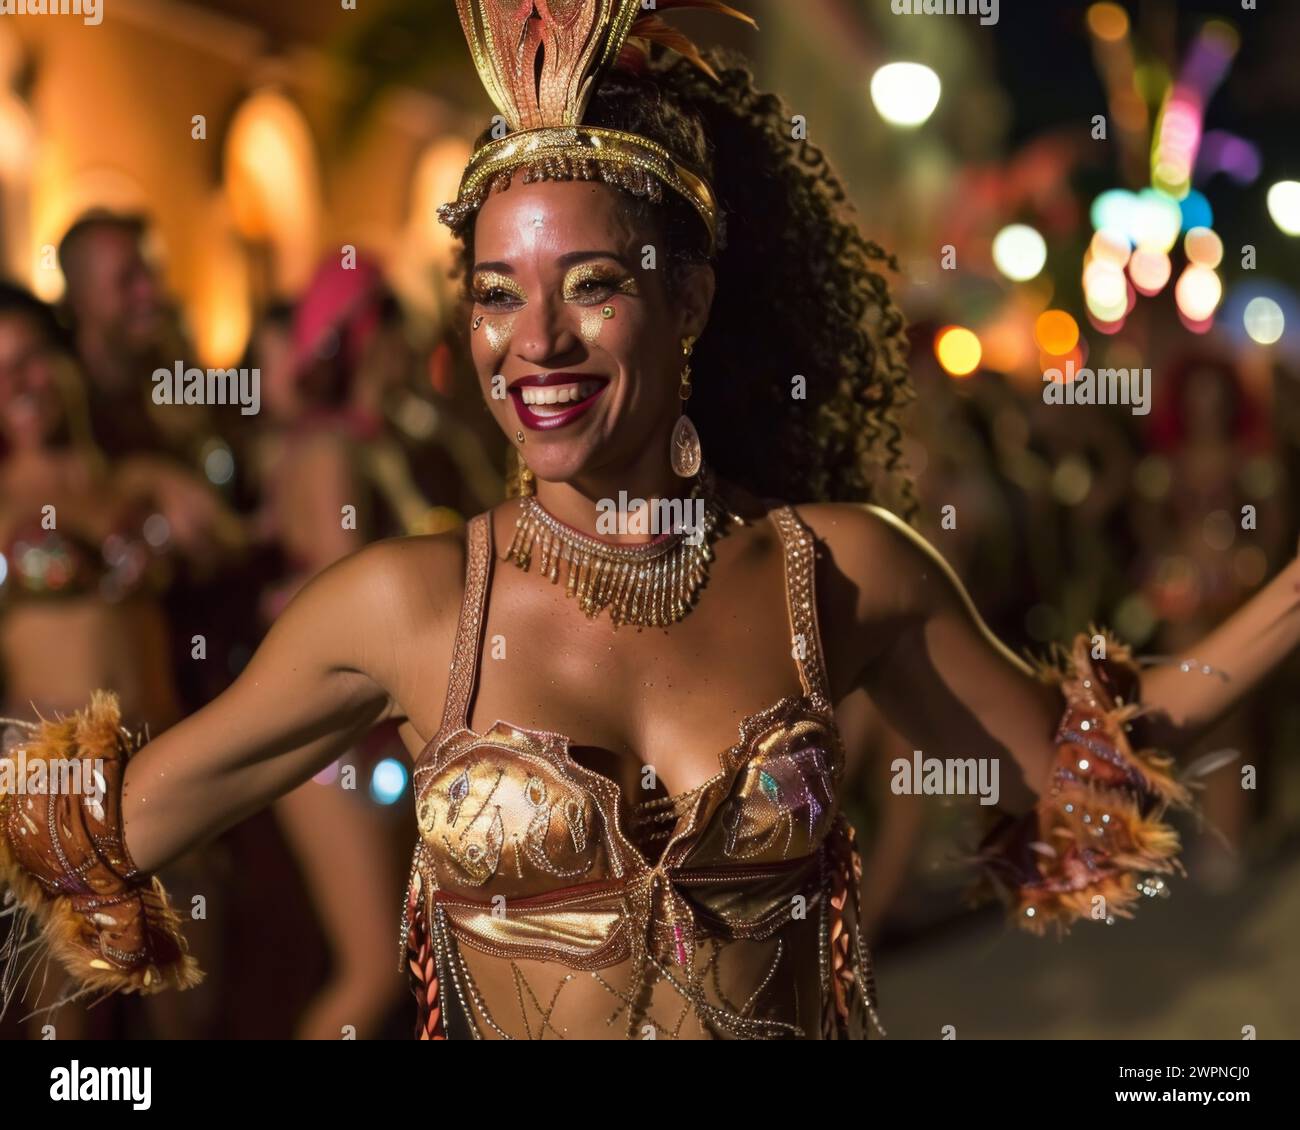 A woman in a costume dances energetically on a vibrant city street. Stock Photo